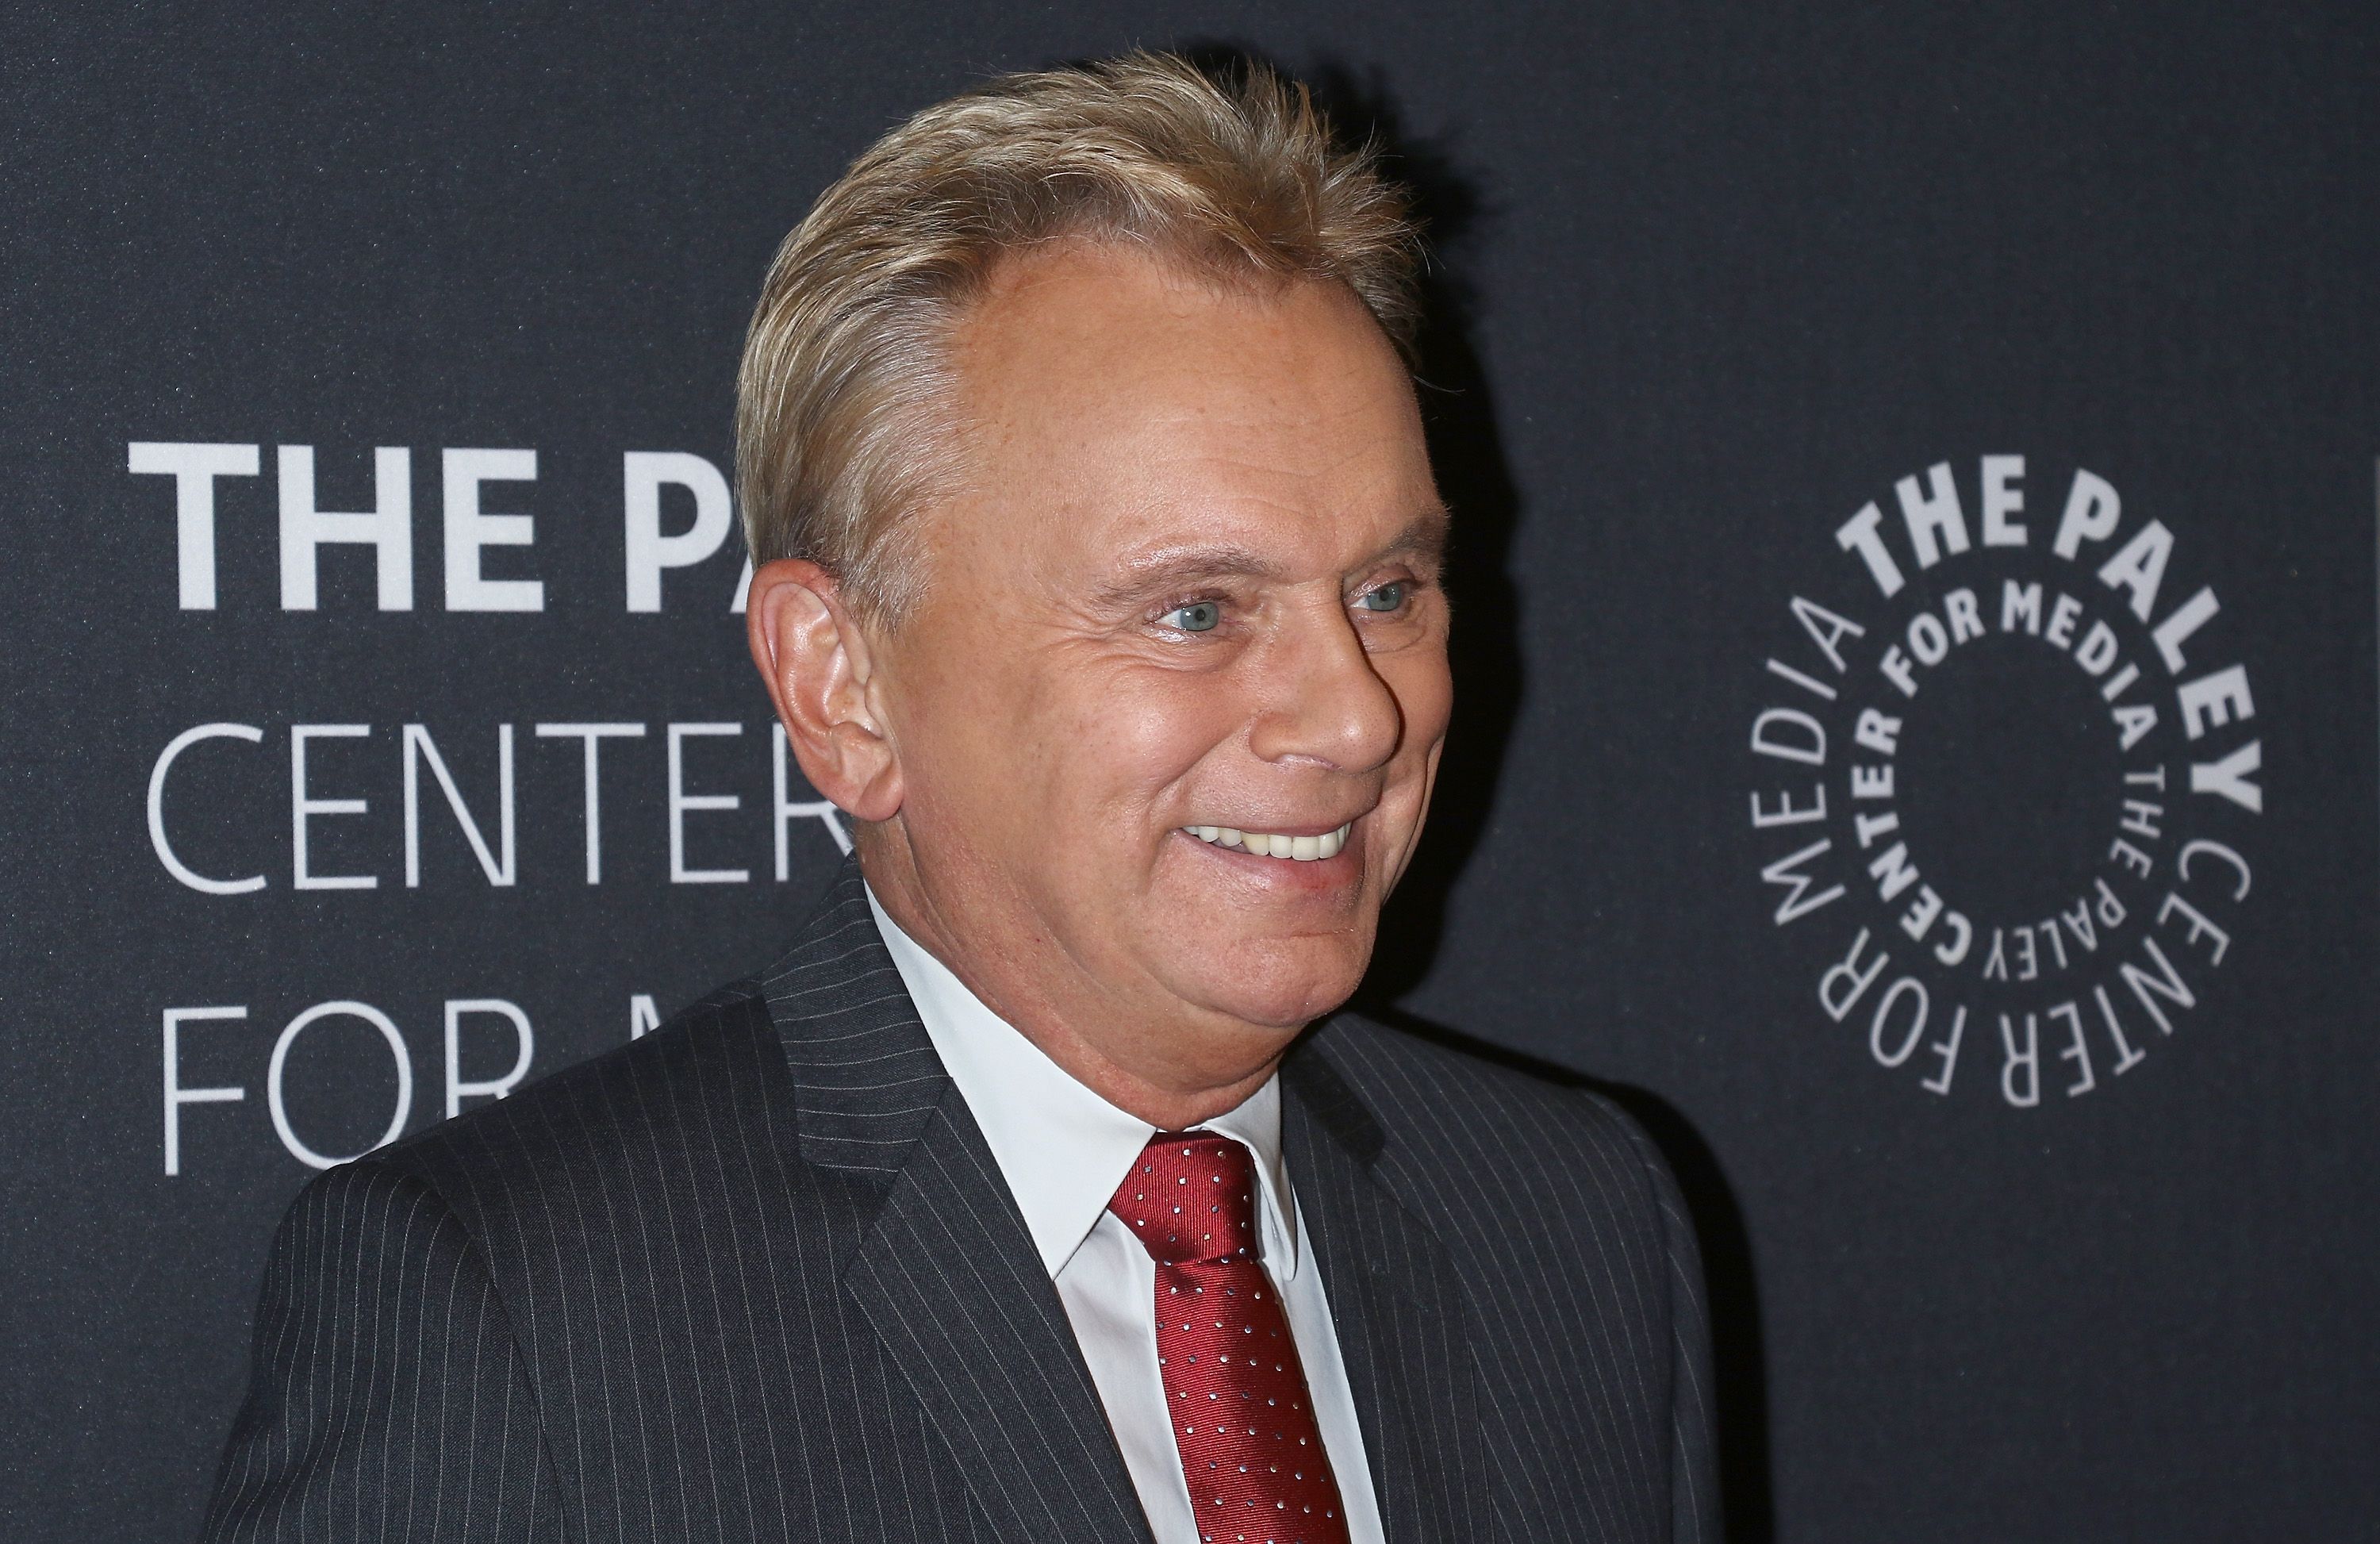 Pat Sajak during the "Wheel of Fortune: 35 Years as America's Game" at The Paley Center for Media on November 15, 2017, in New York City. | Source: Getty Images